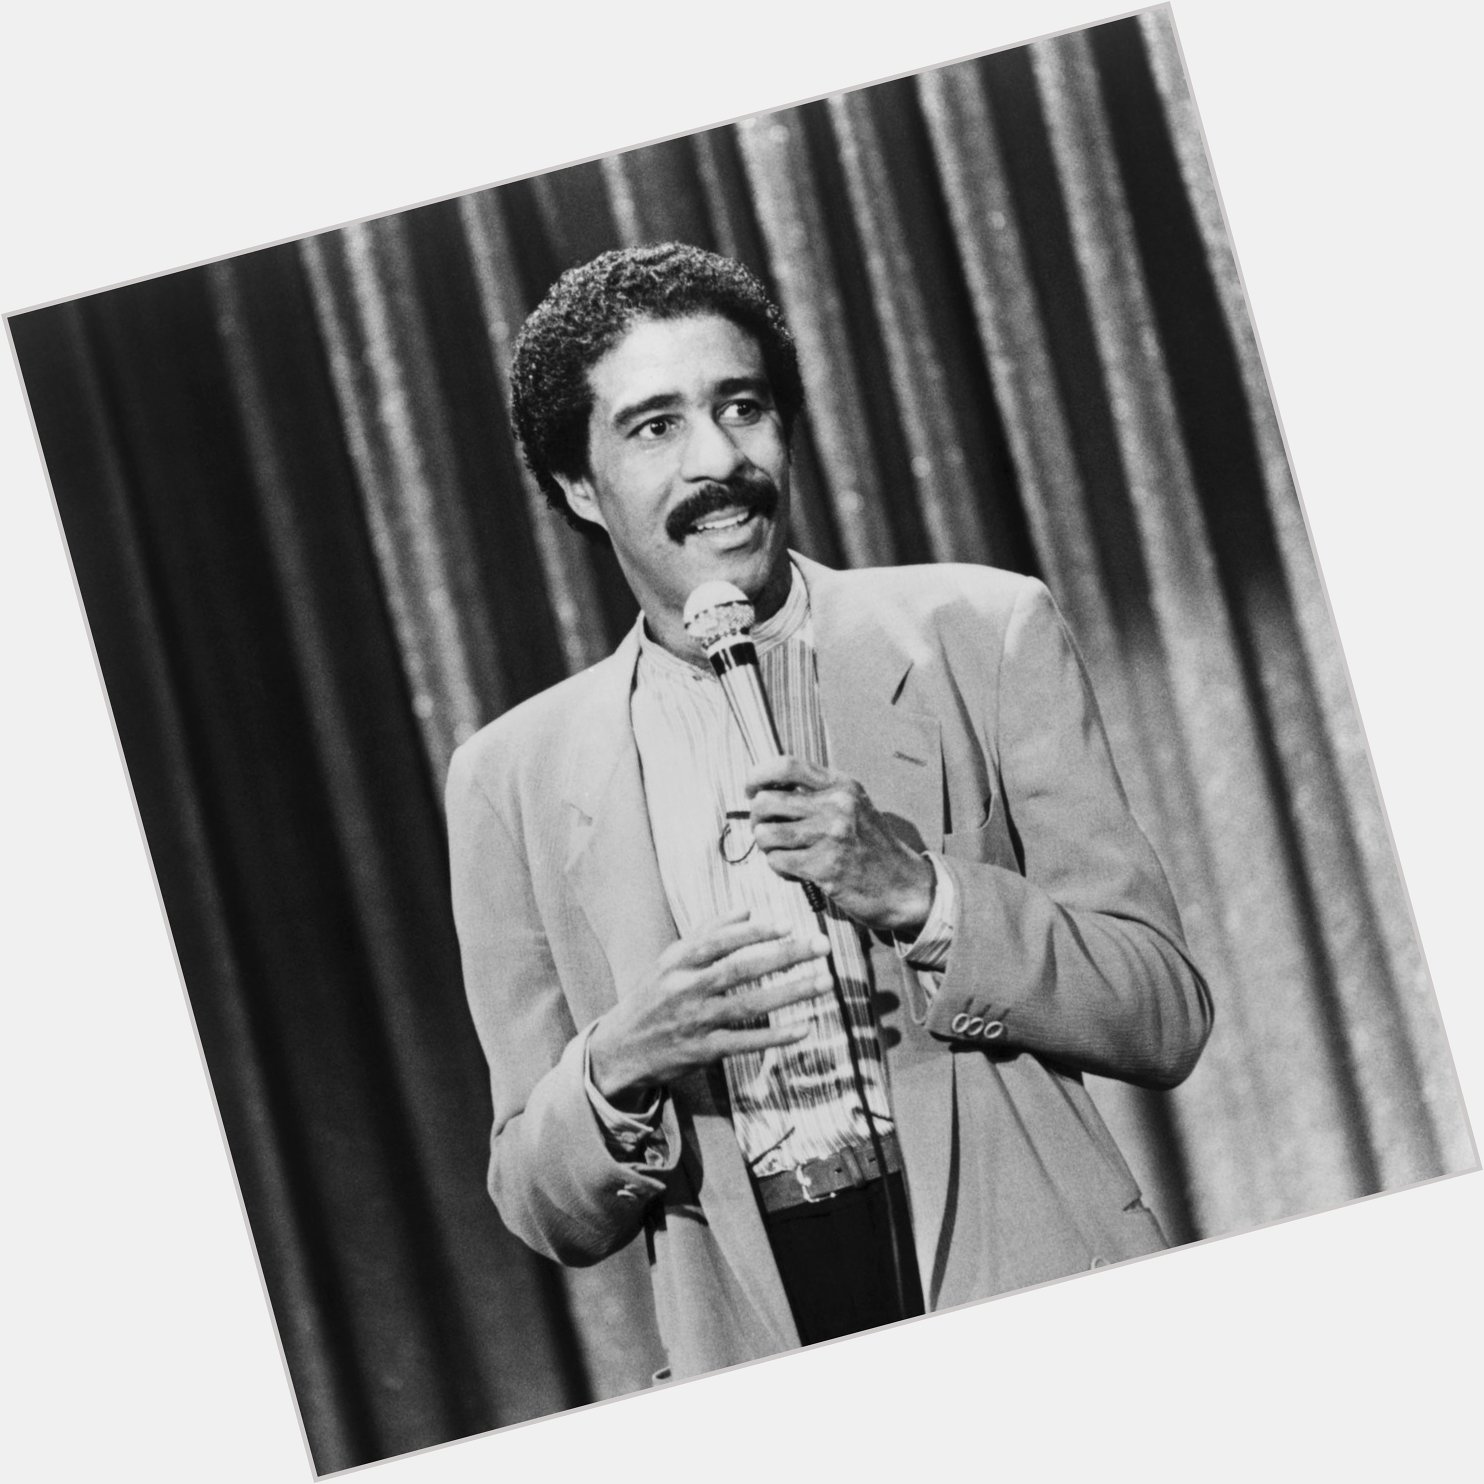 Happy birthday to the funniest person to have ever existed, Richard Pryor. 